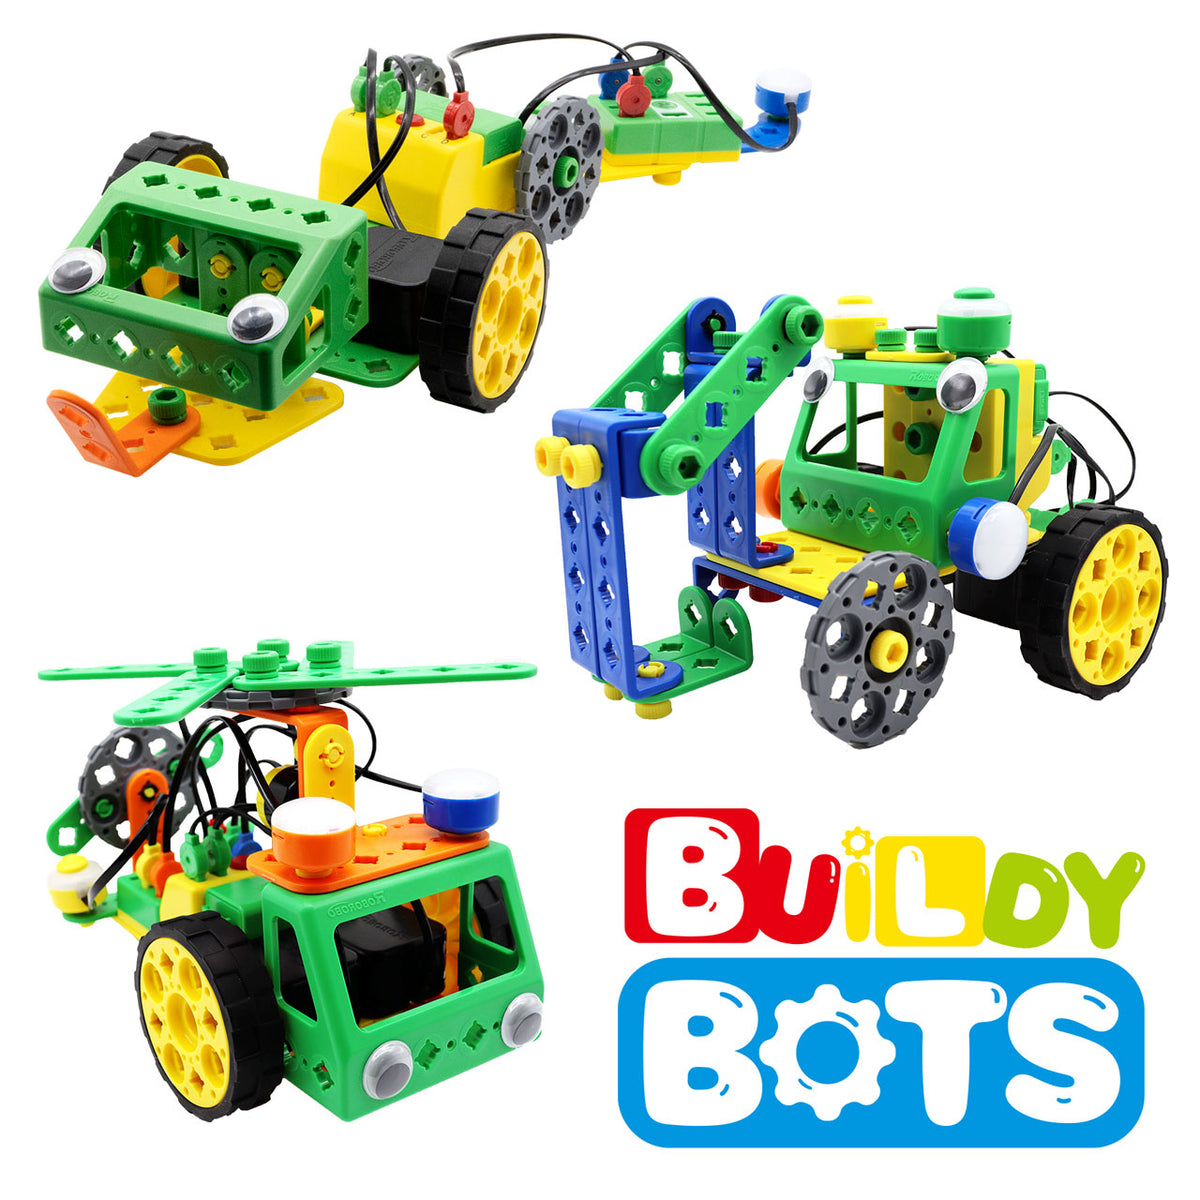 Buildy Bots: Zero-screen time coding & robots for kids 5+ by